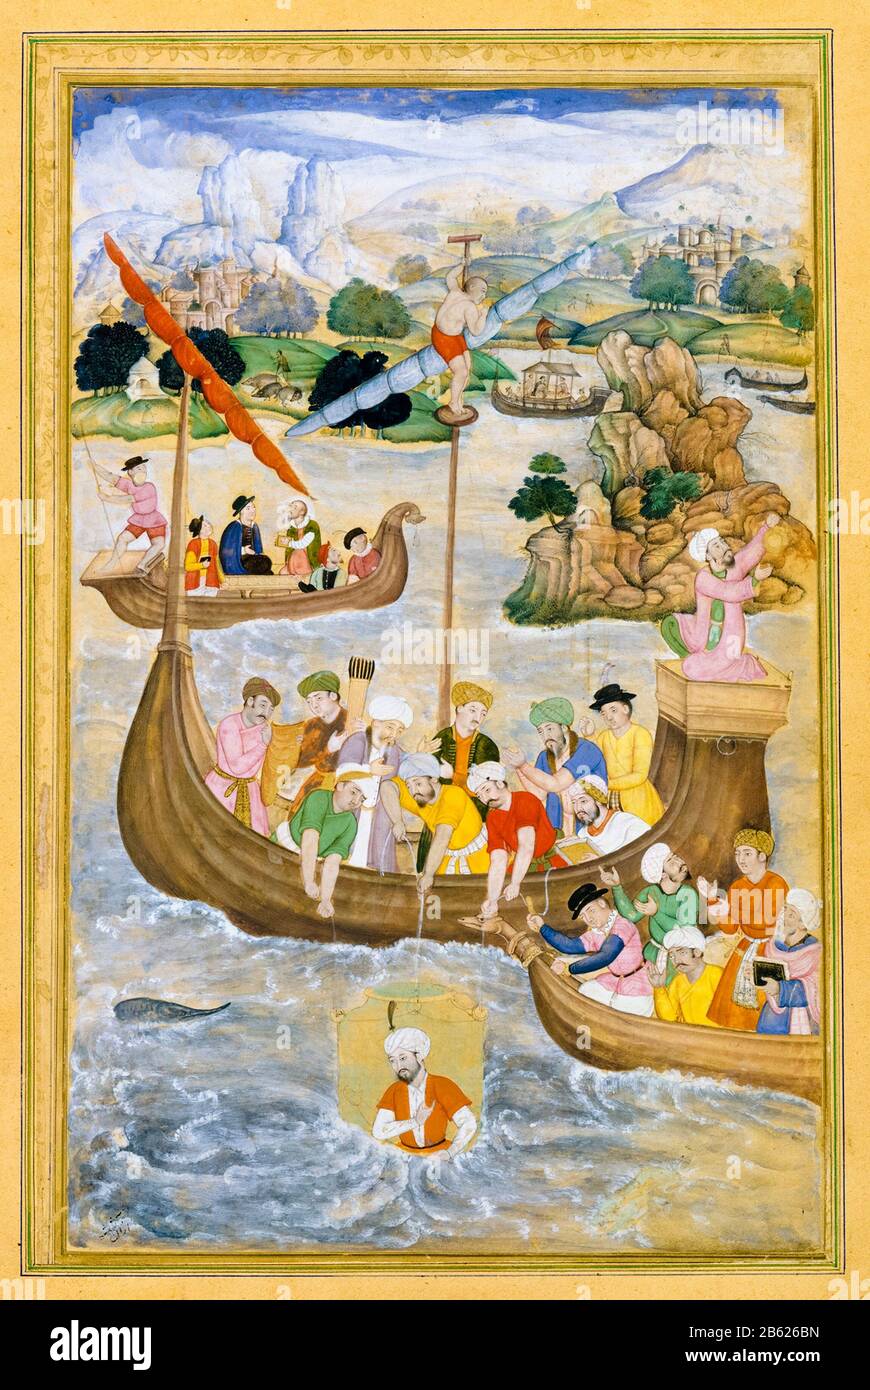 Alexander the Great is Lowered into the Sea, illustration by Mukunda, inspired by, Amir Khusrau Dihlavi, 1597-1598 Stock Photo